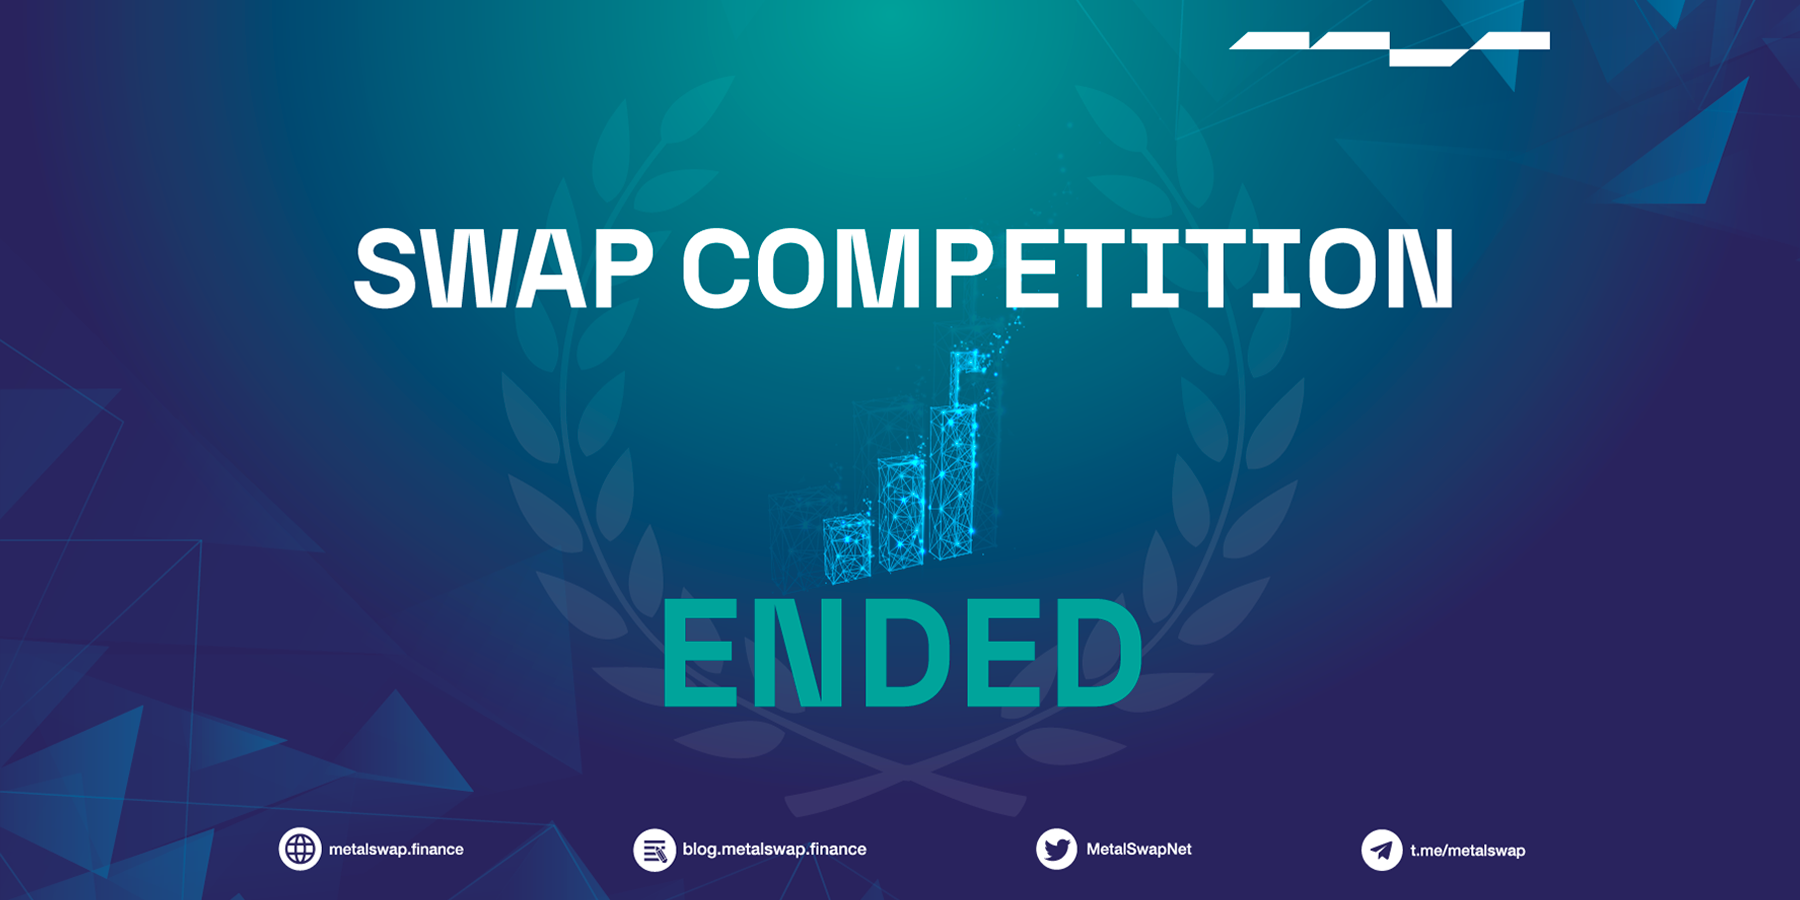 swap_competition_ended